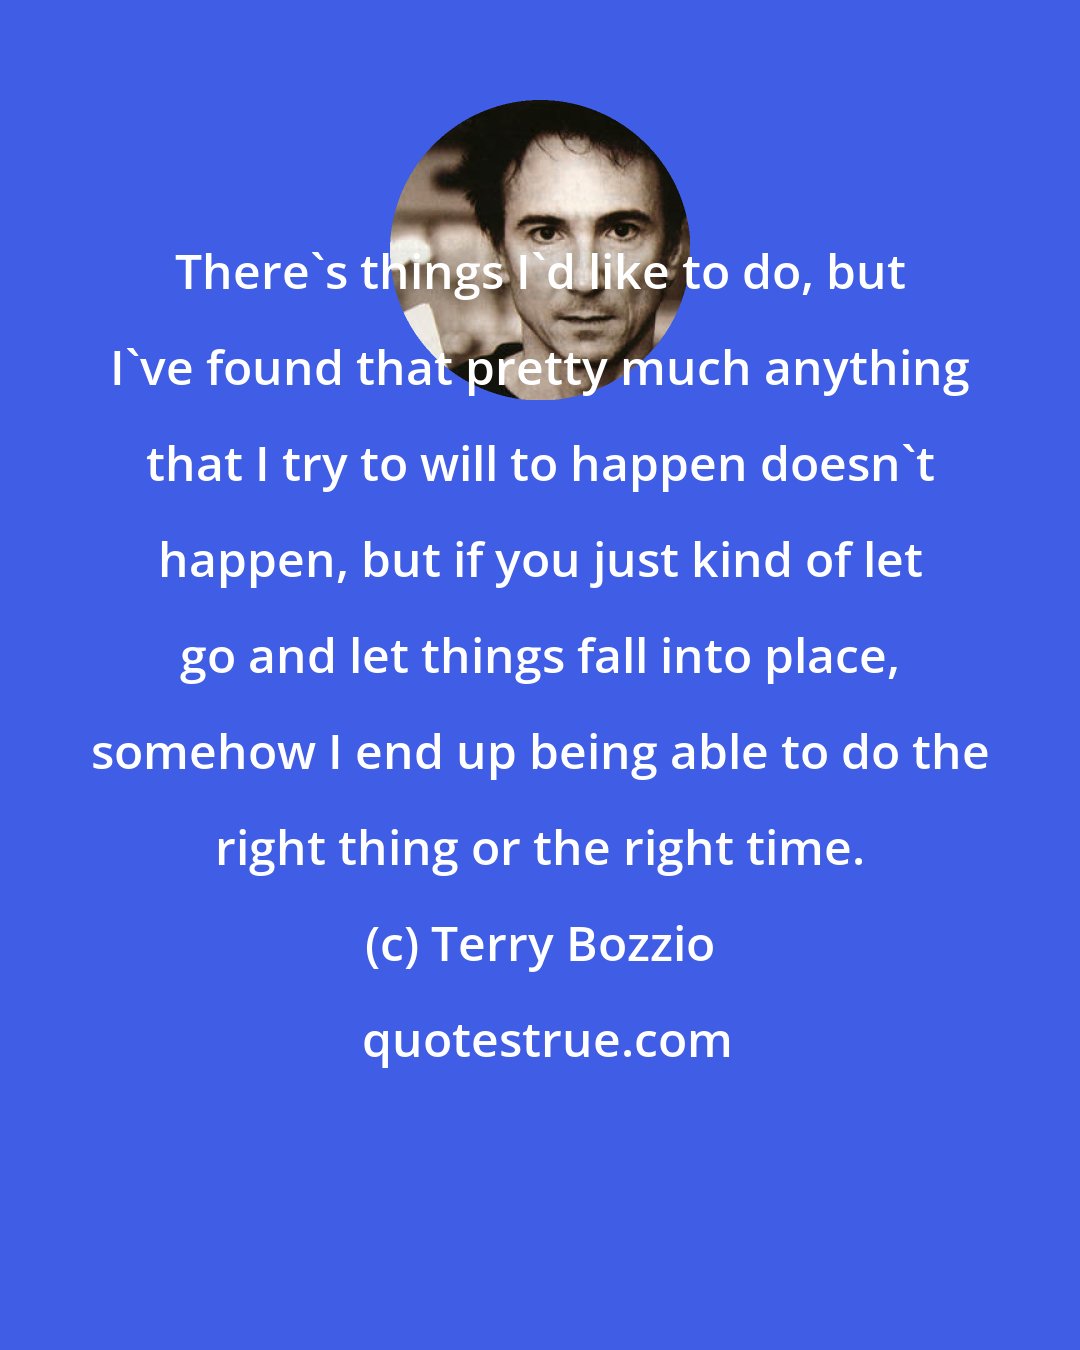 Terry Bozzio: There's things I'd like to do, but I've found that pretty much anything that I try to will to happen doesn't happen, but if you just kind of let go and let things fall into place, somehow I end up being able to do the right thing or the right time.